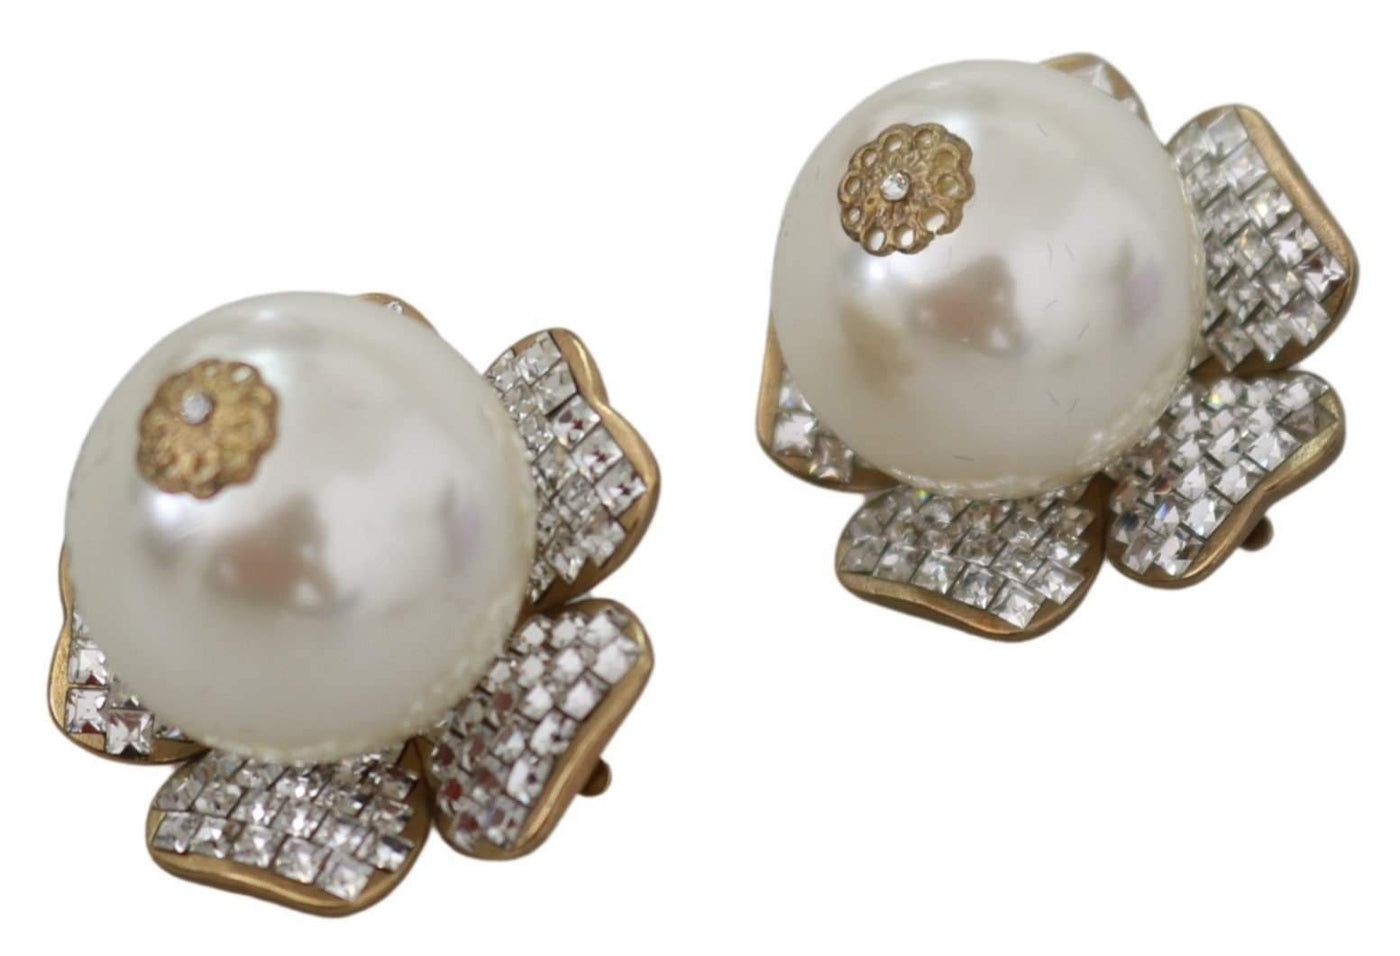 Dolce & Gabbana Gold Tone Maxi Faux Pearl Floral Clip-on Jewelry Earrings #women, Accessories - New Arrivals, Brand_Dolce & Gabbana, Dolce & Gabbana, Earrings - Women - Jewelry, feed-agegroup-adult, feed-color-gold, feed-gender-female, feed-size-OS, Gender_Women, Gold at SEYMAYKA